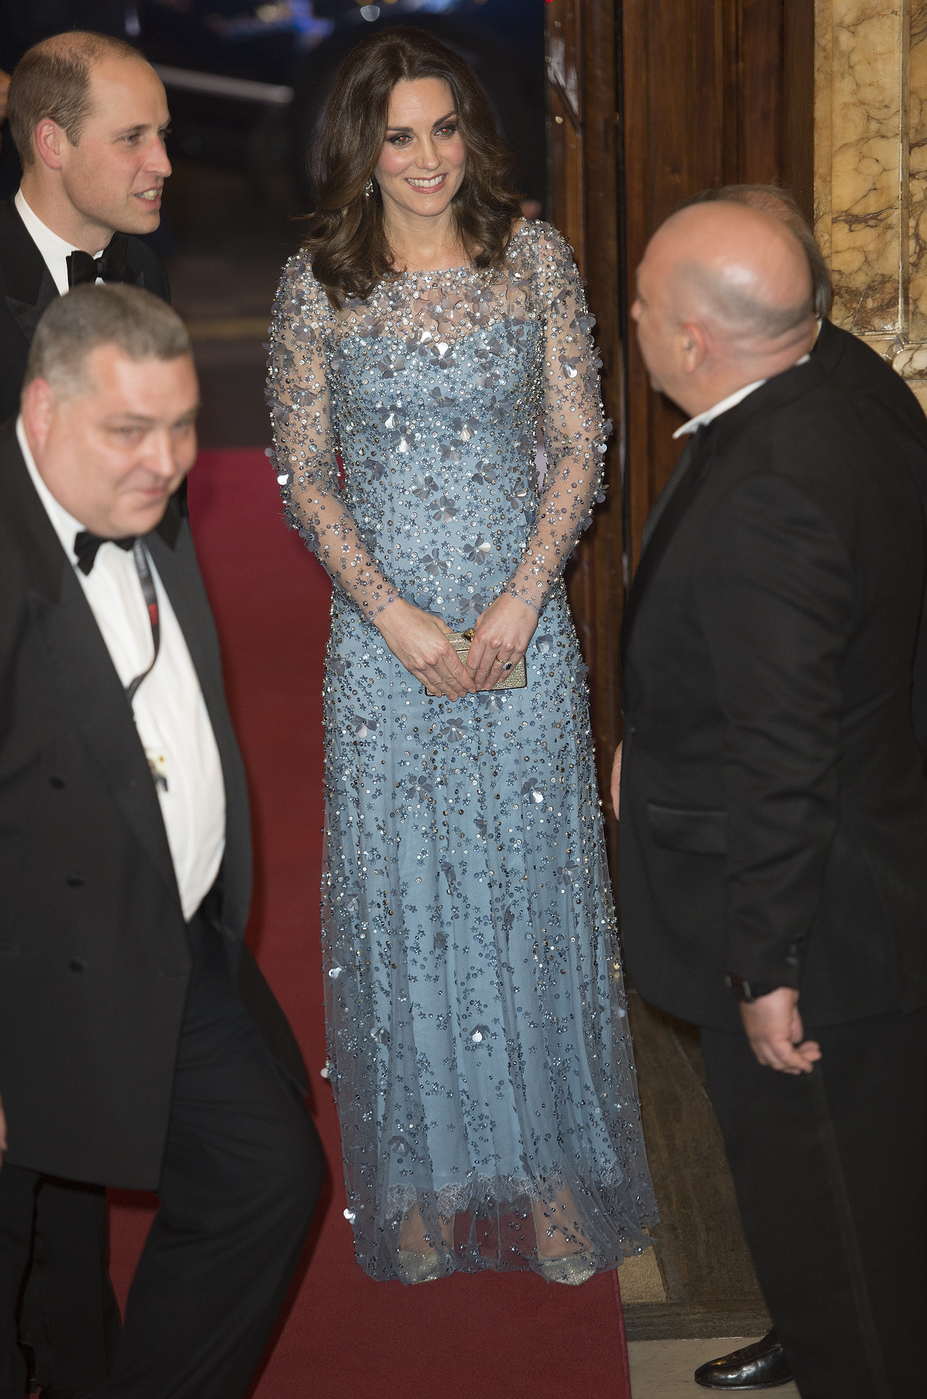 The Duke and Duchess of Cambridge attend the Royal Variety Performance at the Palladium Theatre, London